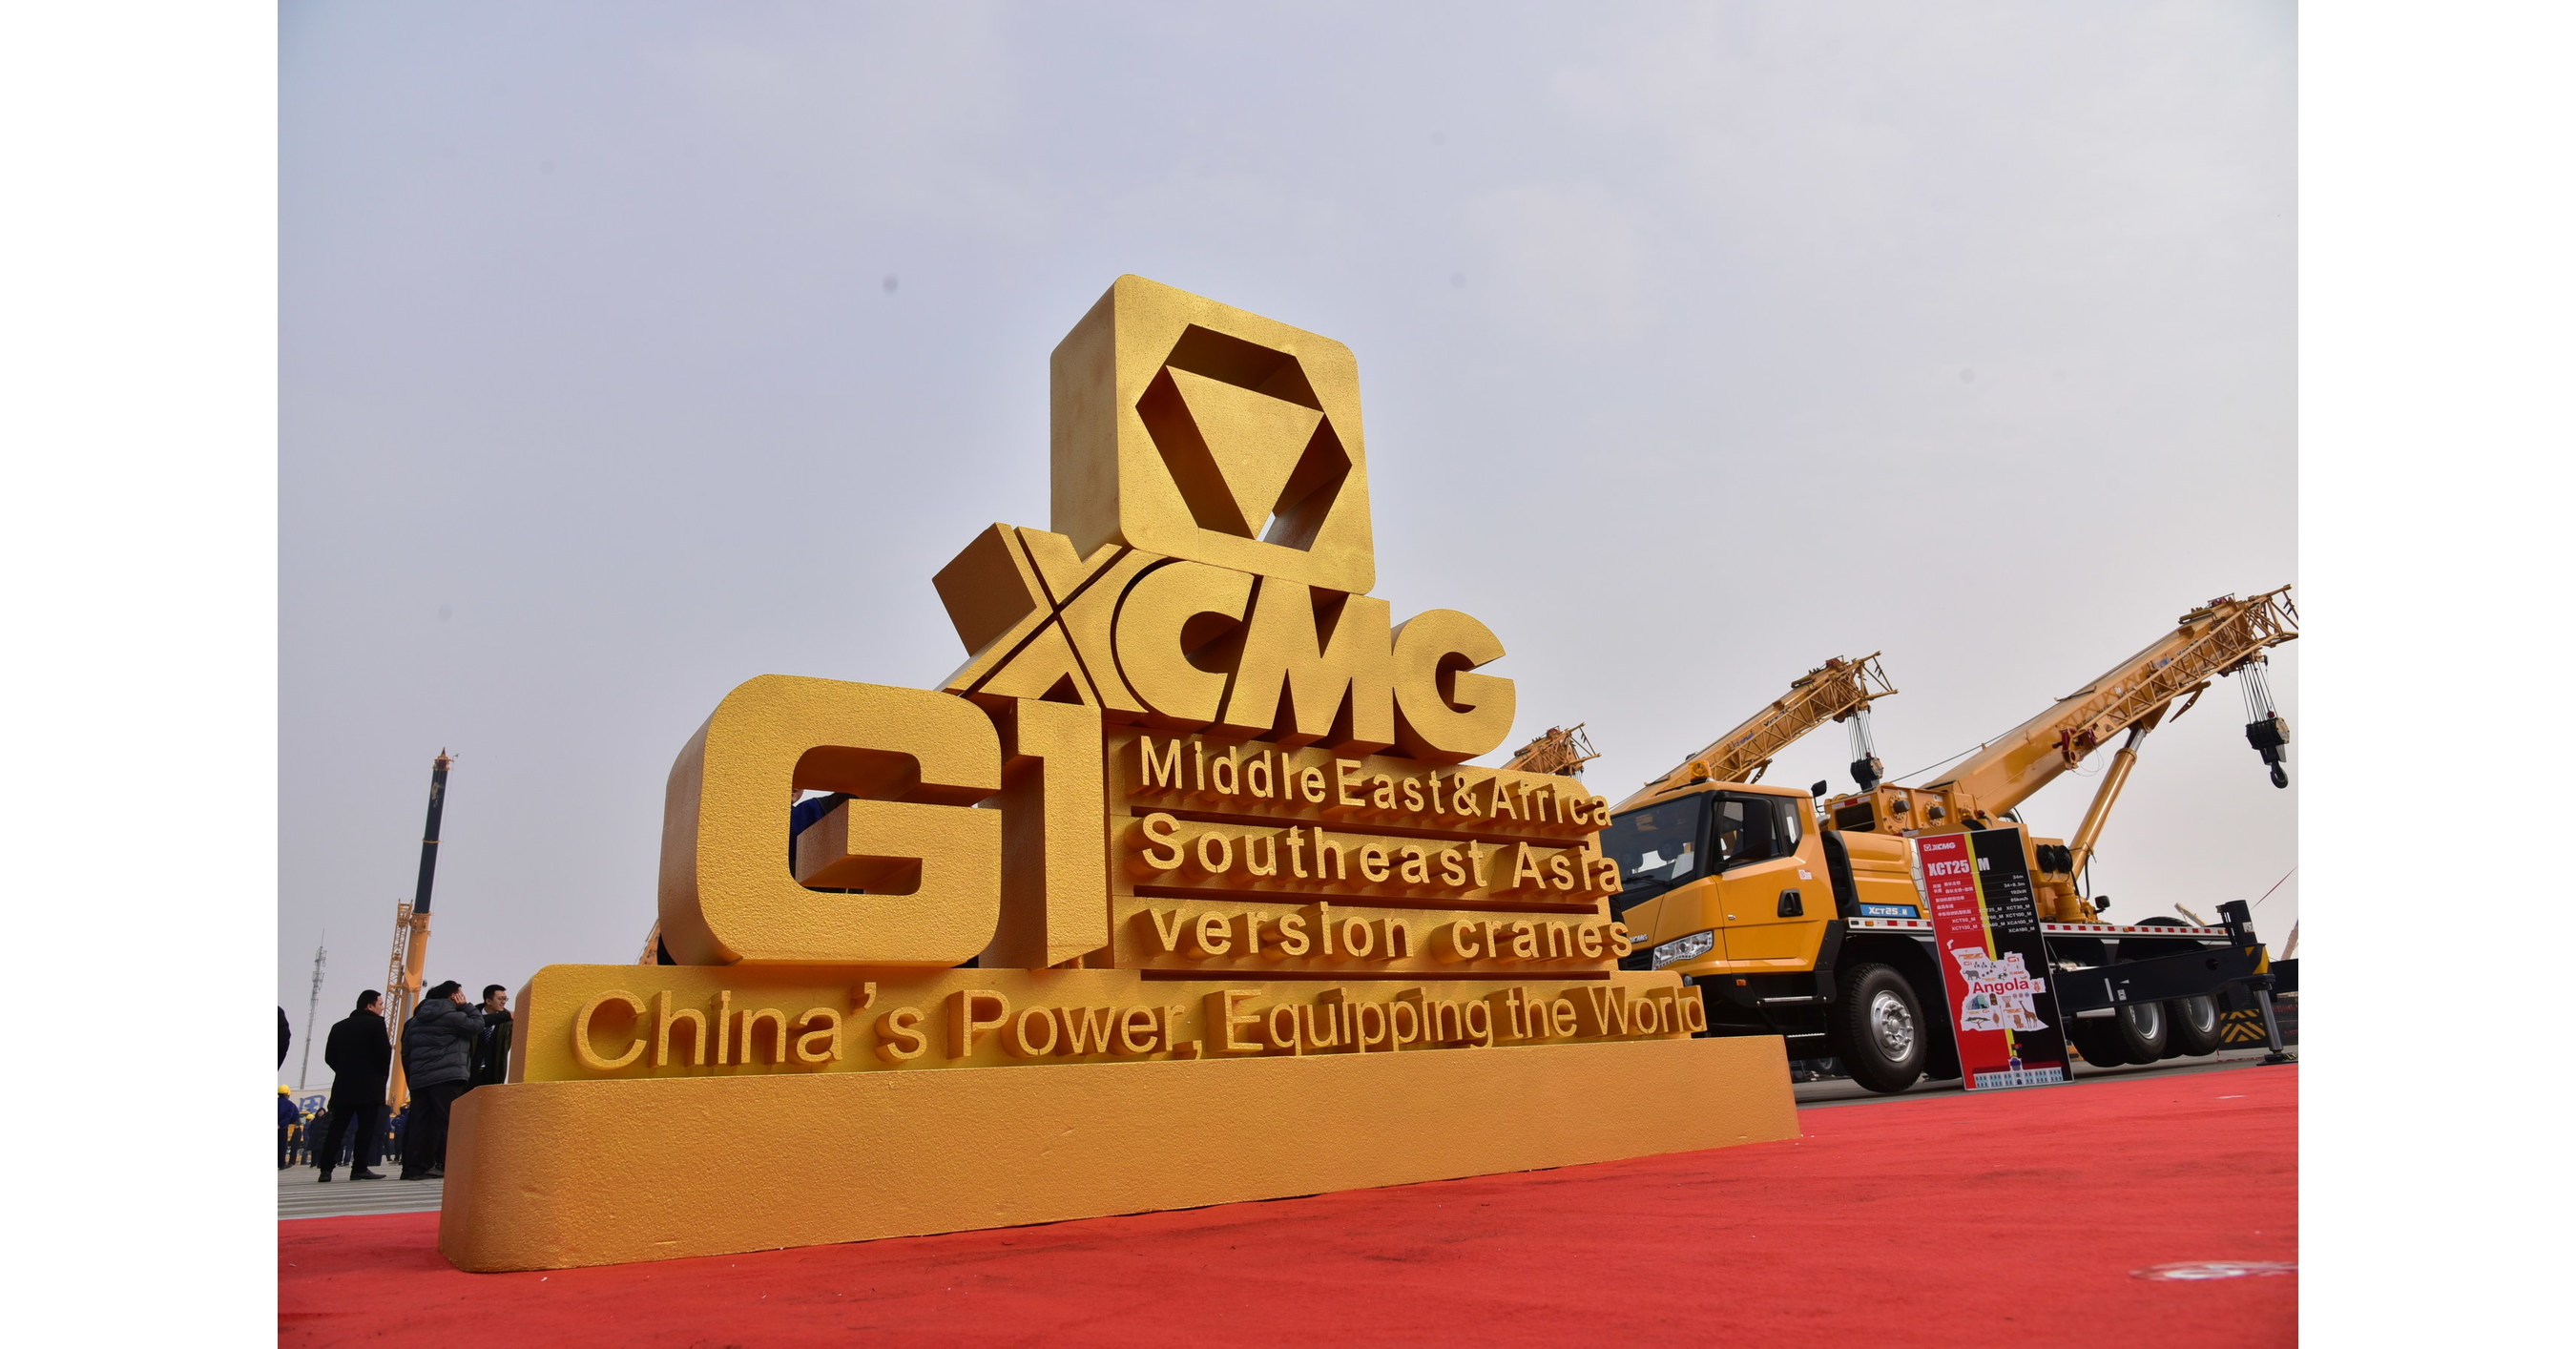 xcmg-announces-plan-to-release-84-g-series-cranes-in-2019-in-overseas